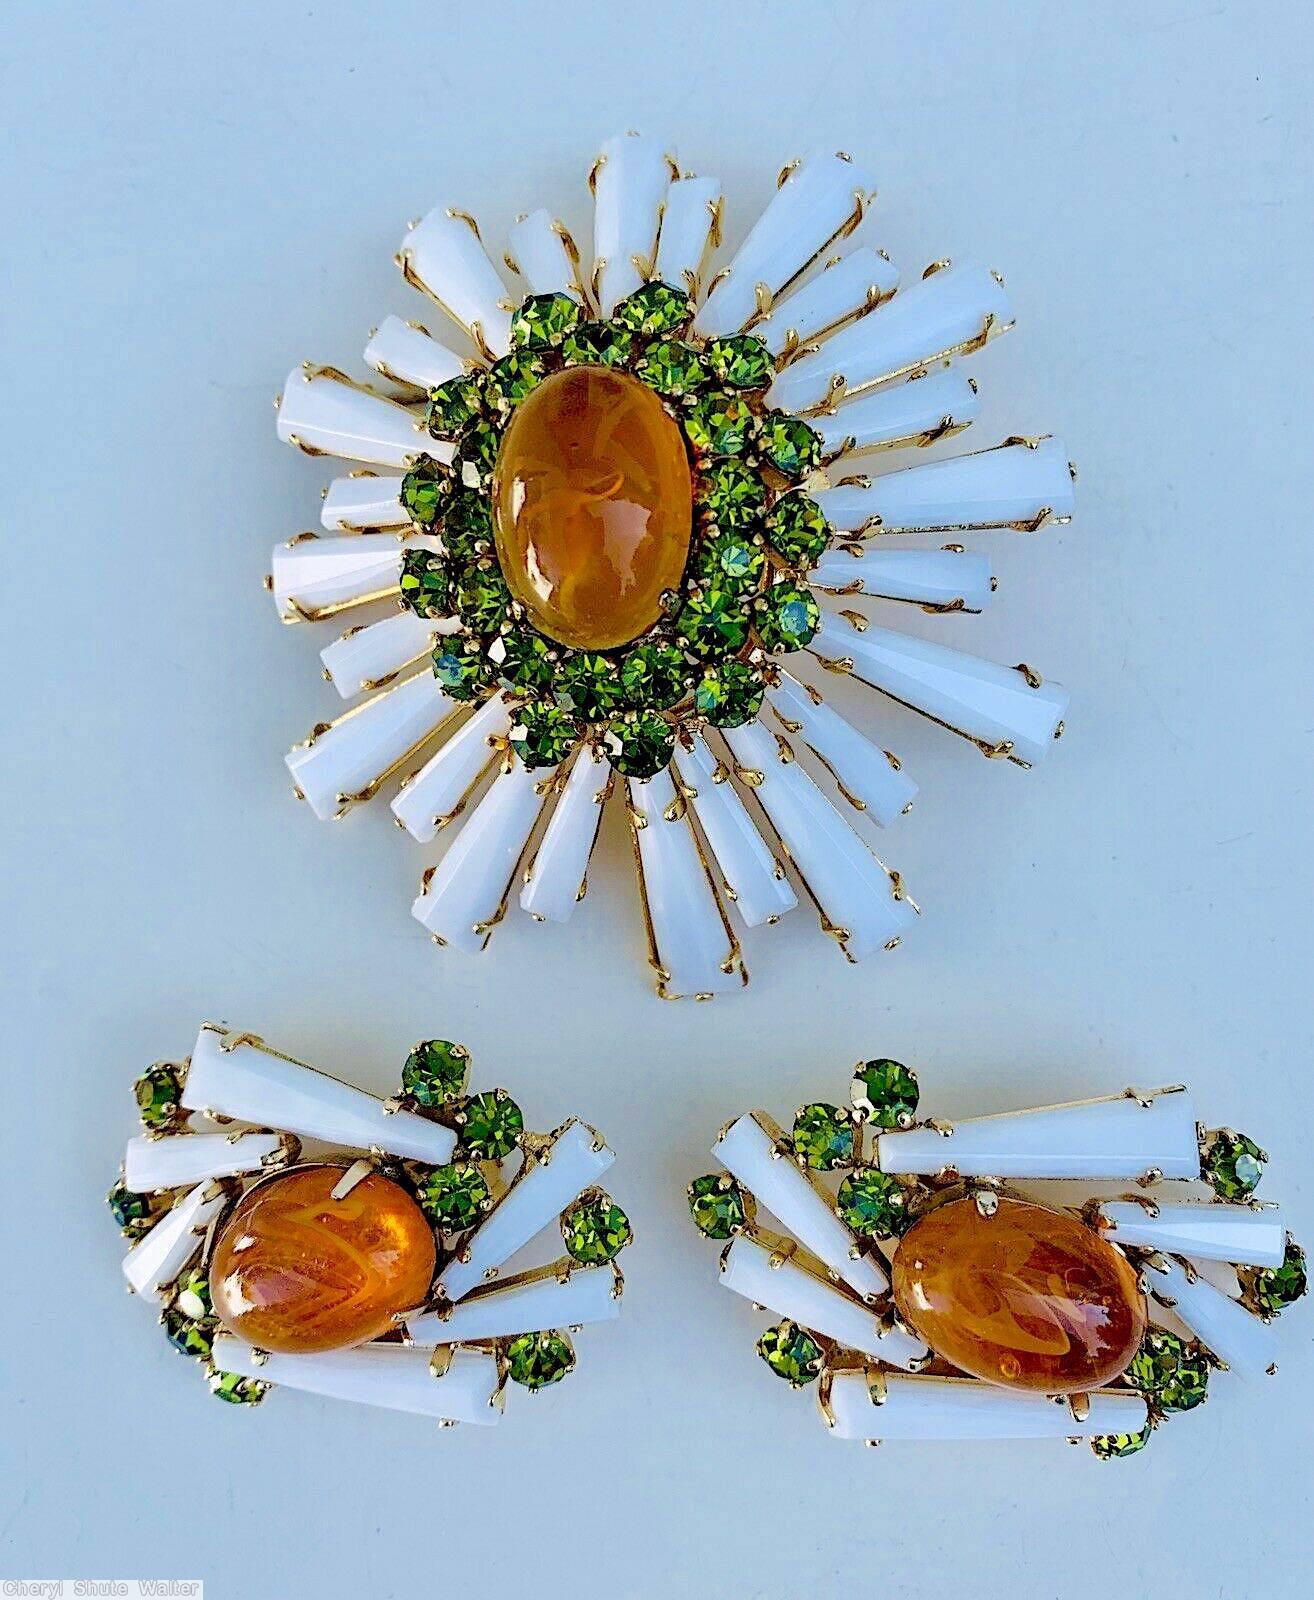 Schreiner oval high domed keystone ruffle pin large oval center varied length keystone white keystone marbled amber large oval cab center peridot 2 round surrounding chaton goldtone jewelry